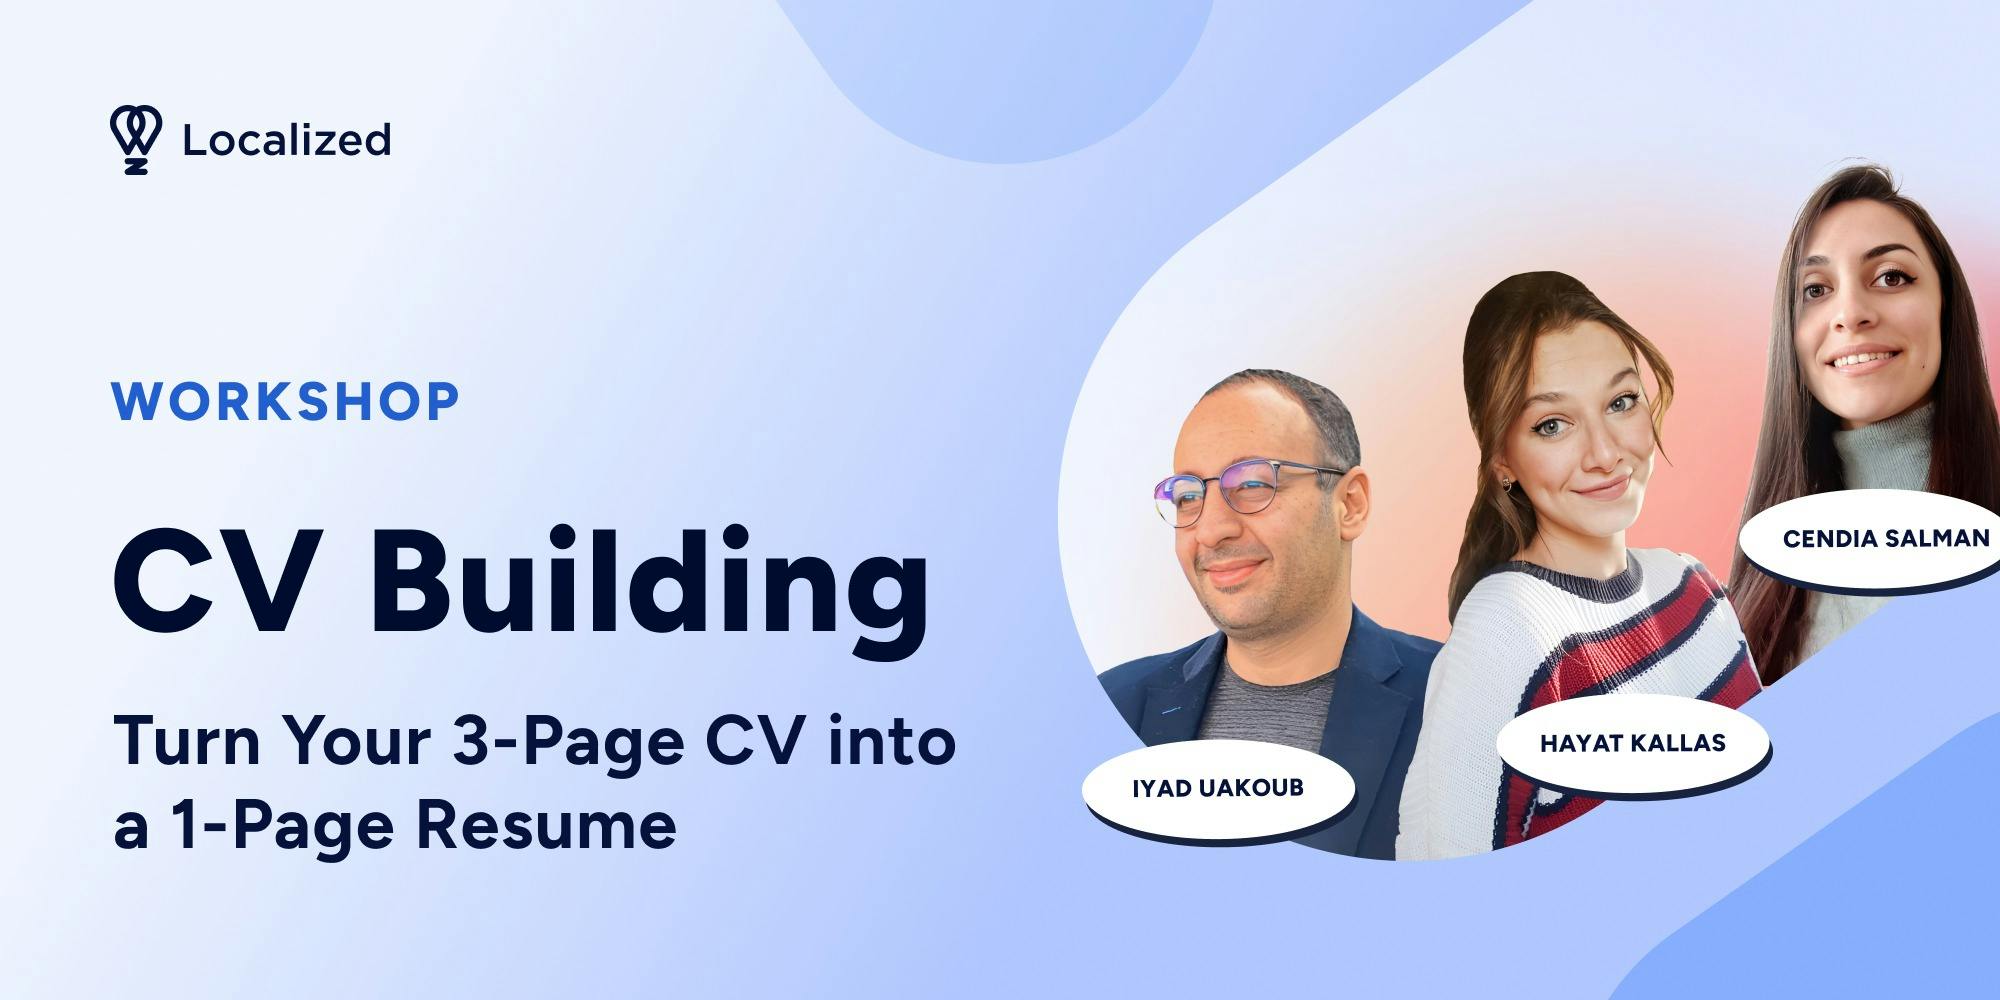 Workshop: Turn Your 3-Page CV into a 1-Page Resume